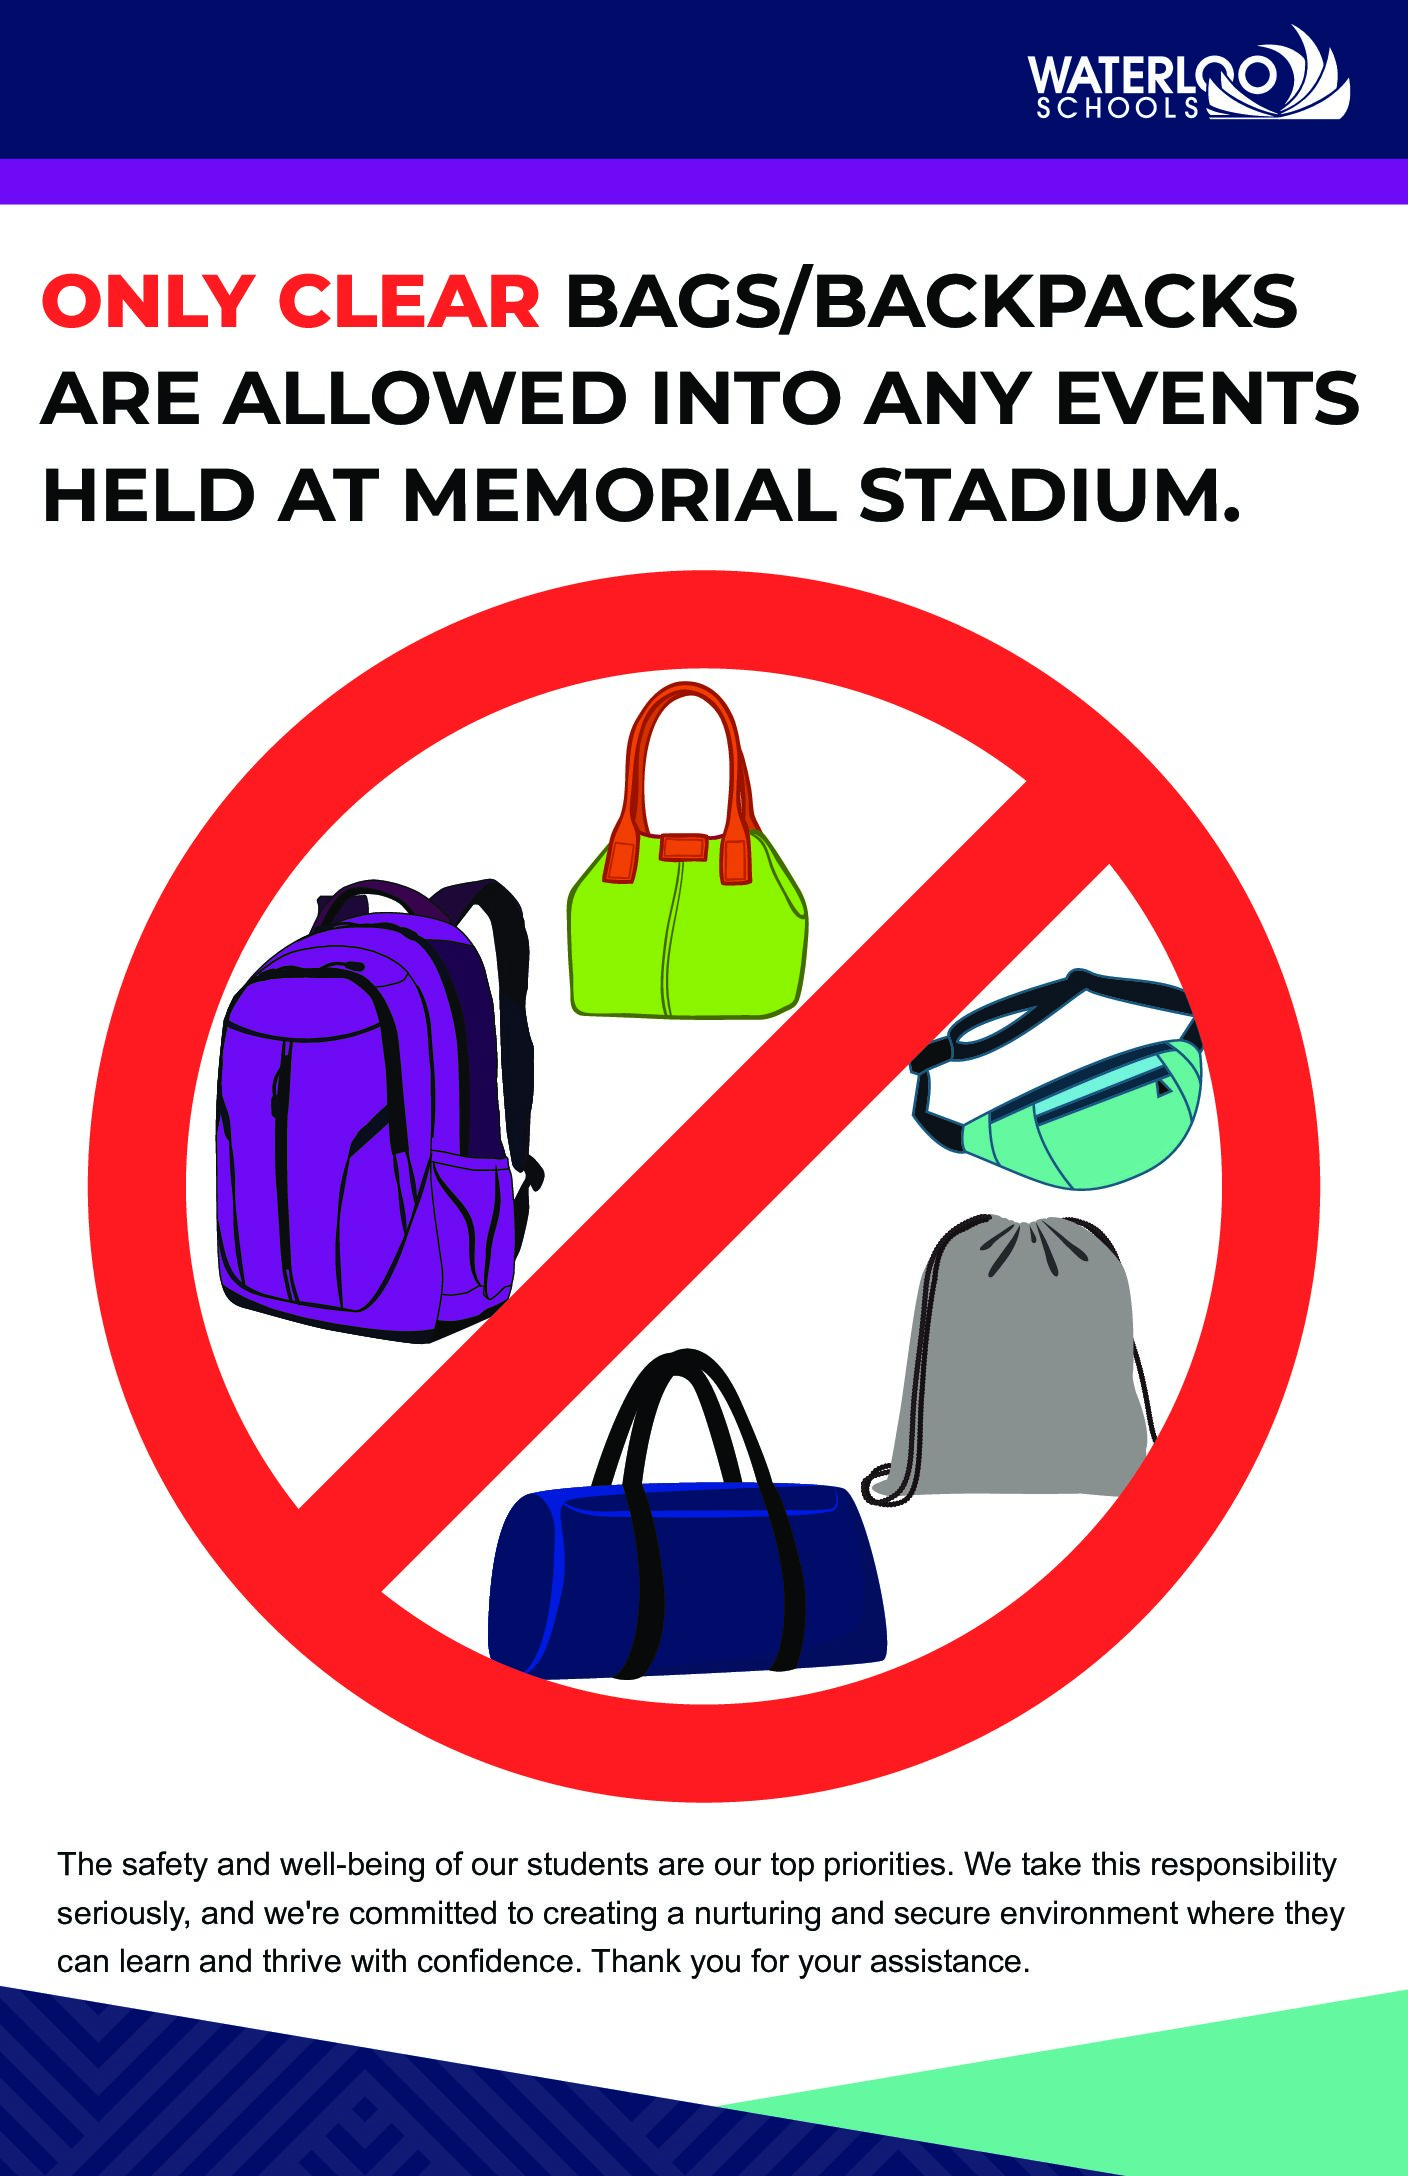 Memorial Stadium revised bag policy rules - only clear bags or